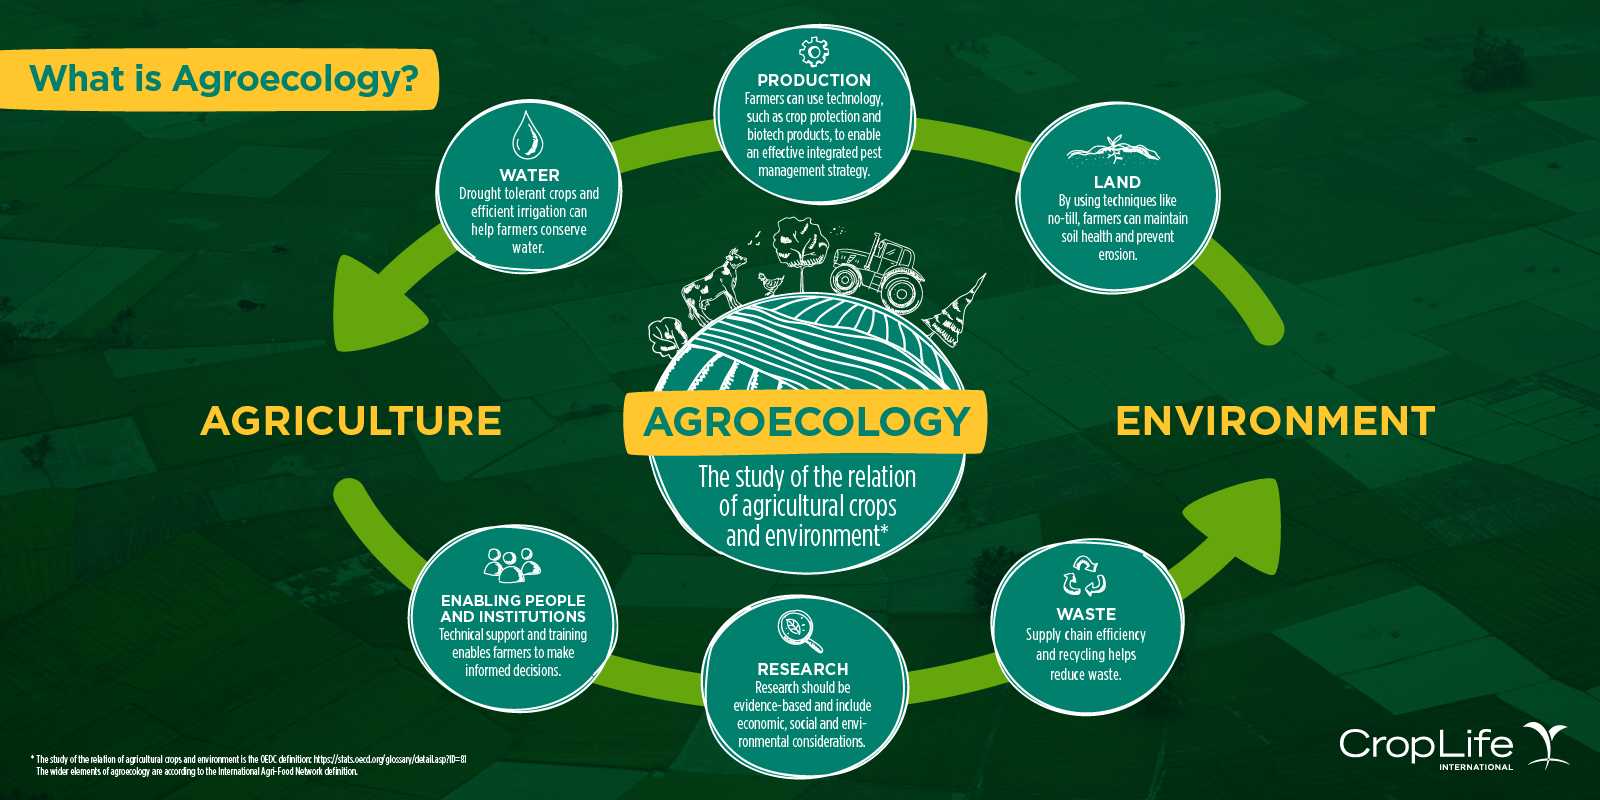 https://science20.org/sites/scieu.local/files/blogs/agroecology.png